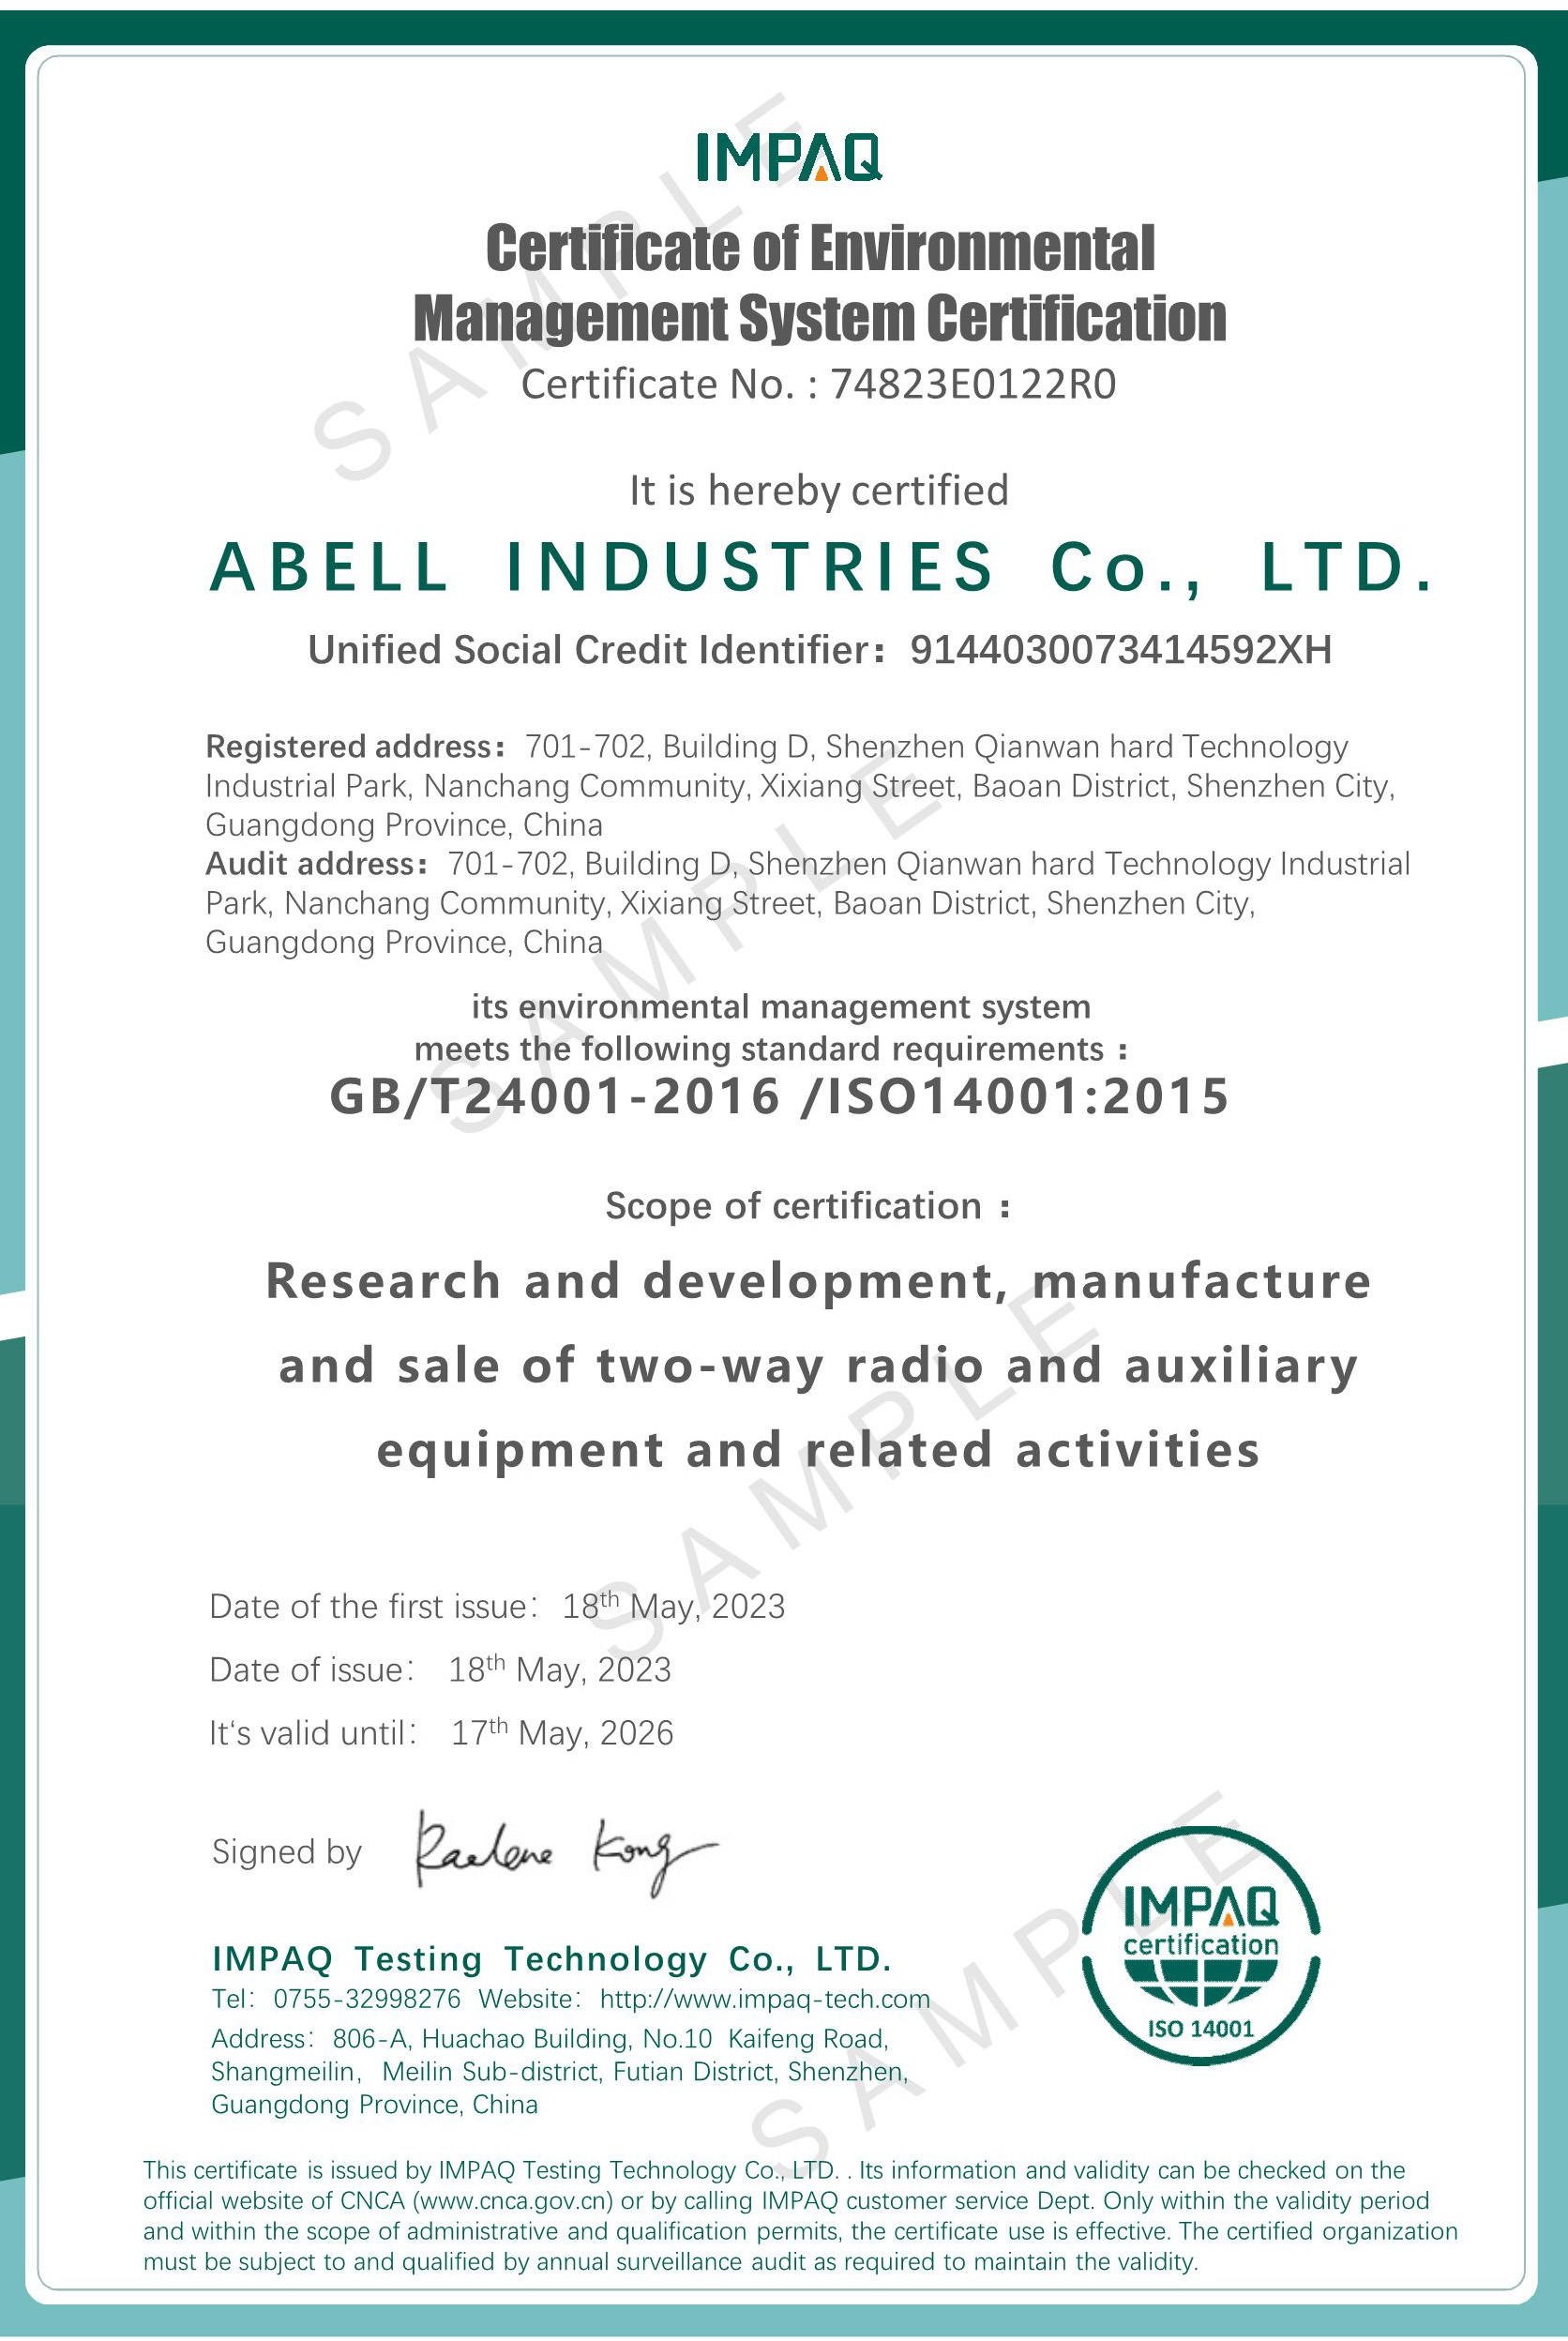 In May 2023, ABELL received certifications for its Environmental Management System.